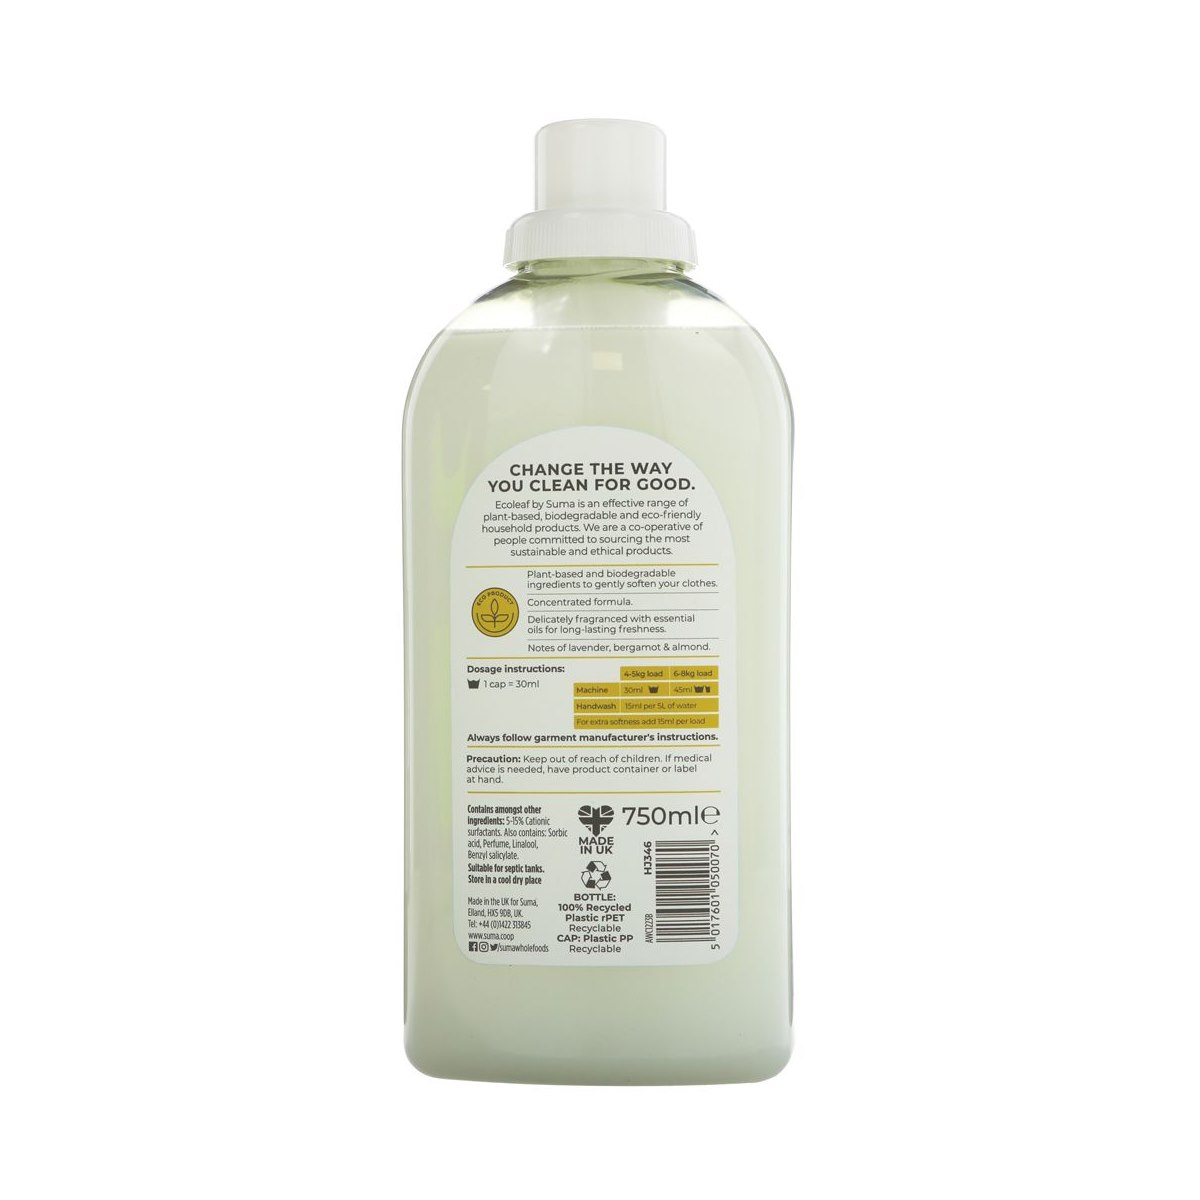 Ecoleaf Concentrated Fabric Conditioner Vanilla and Apple Blossom Usage Instructions